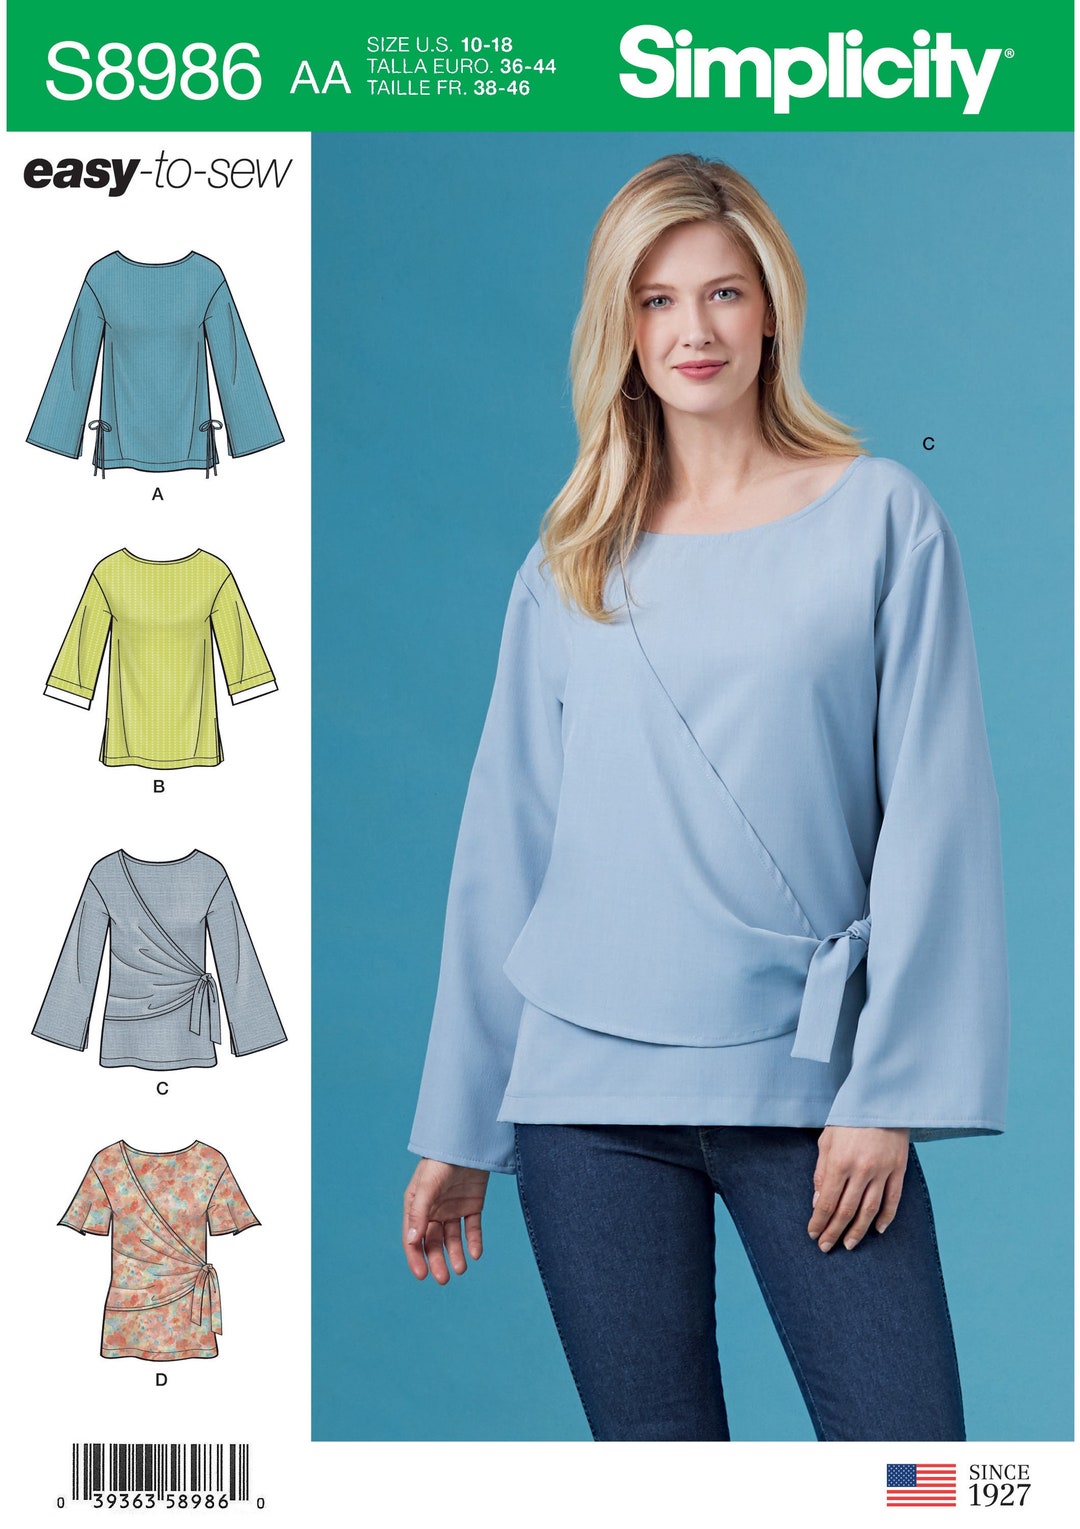 Simplicity S8986 Sewing Pattern for Easy to Sew Blouse With Drape and ...